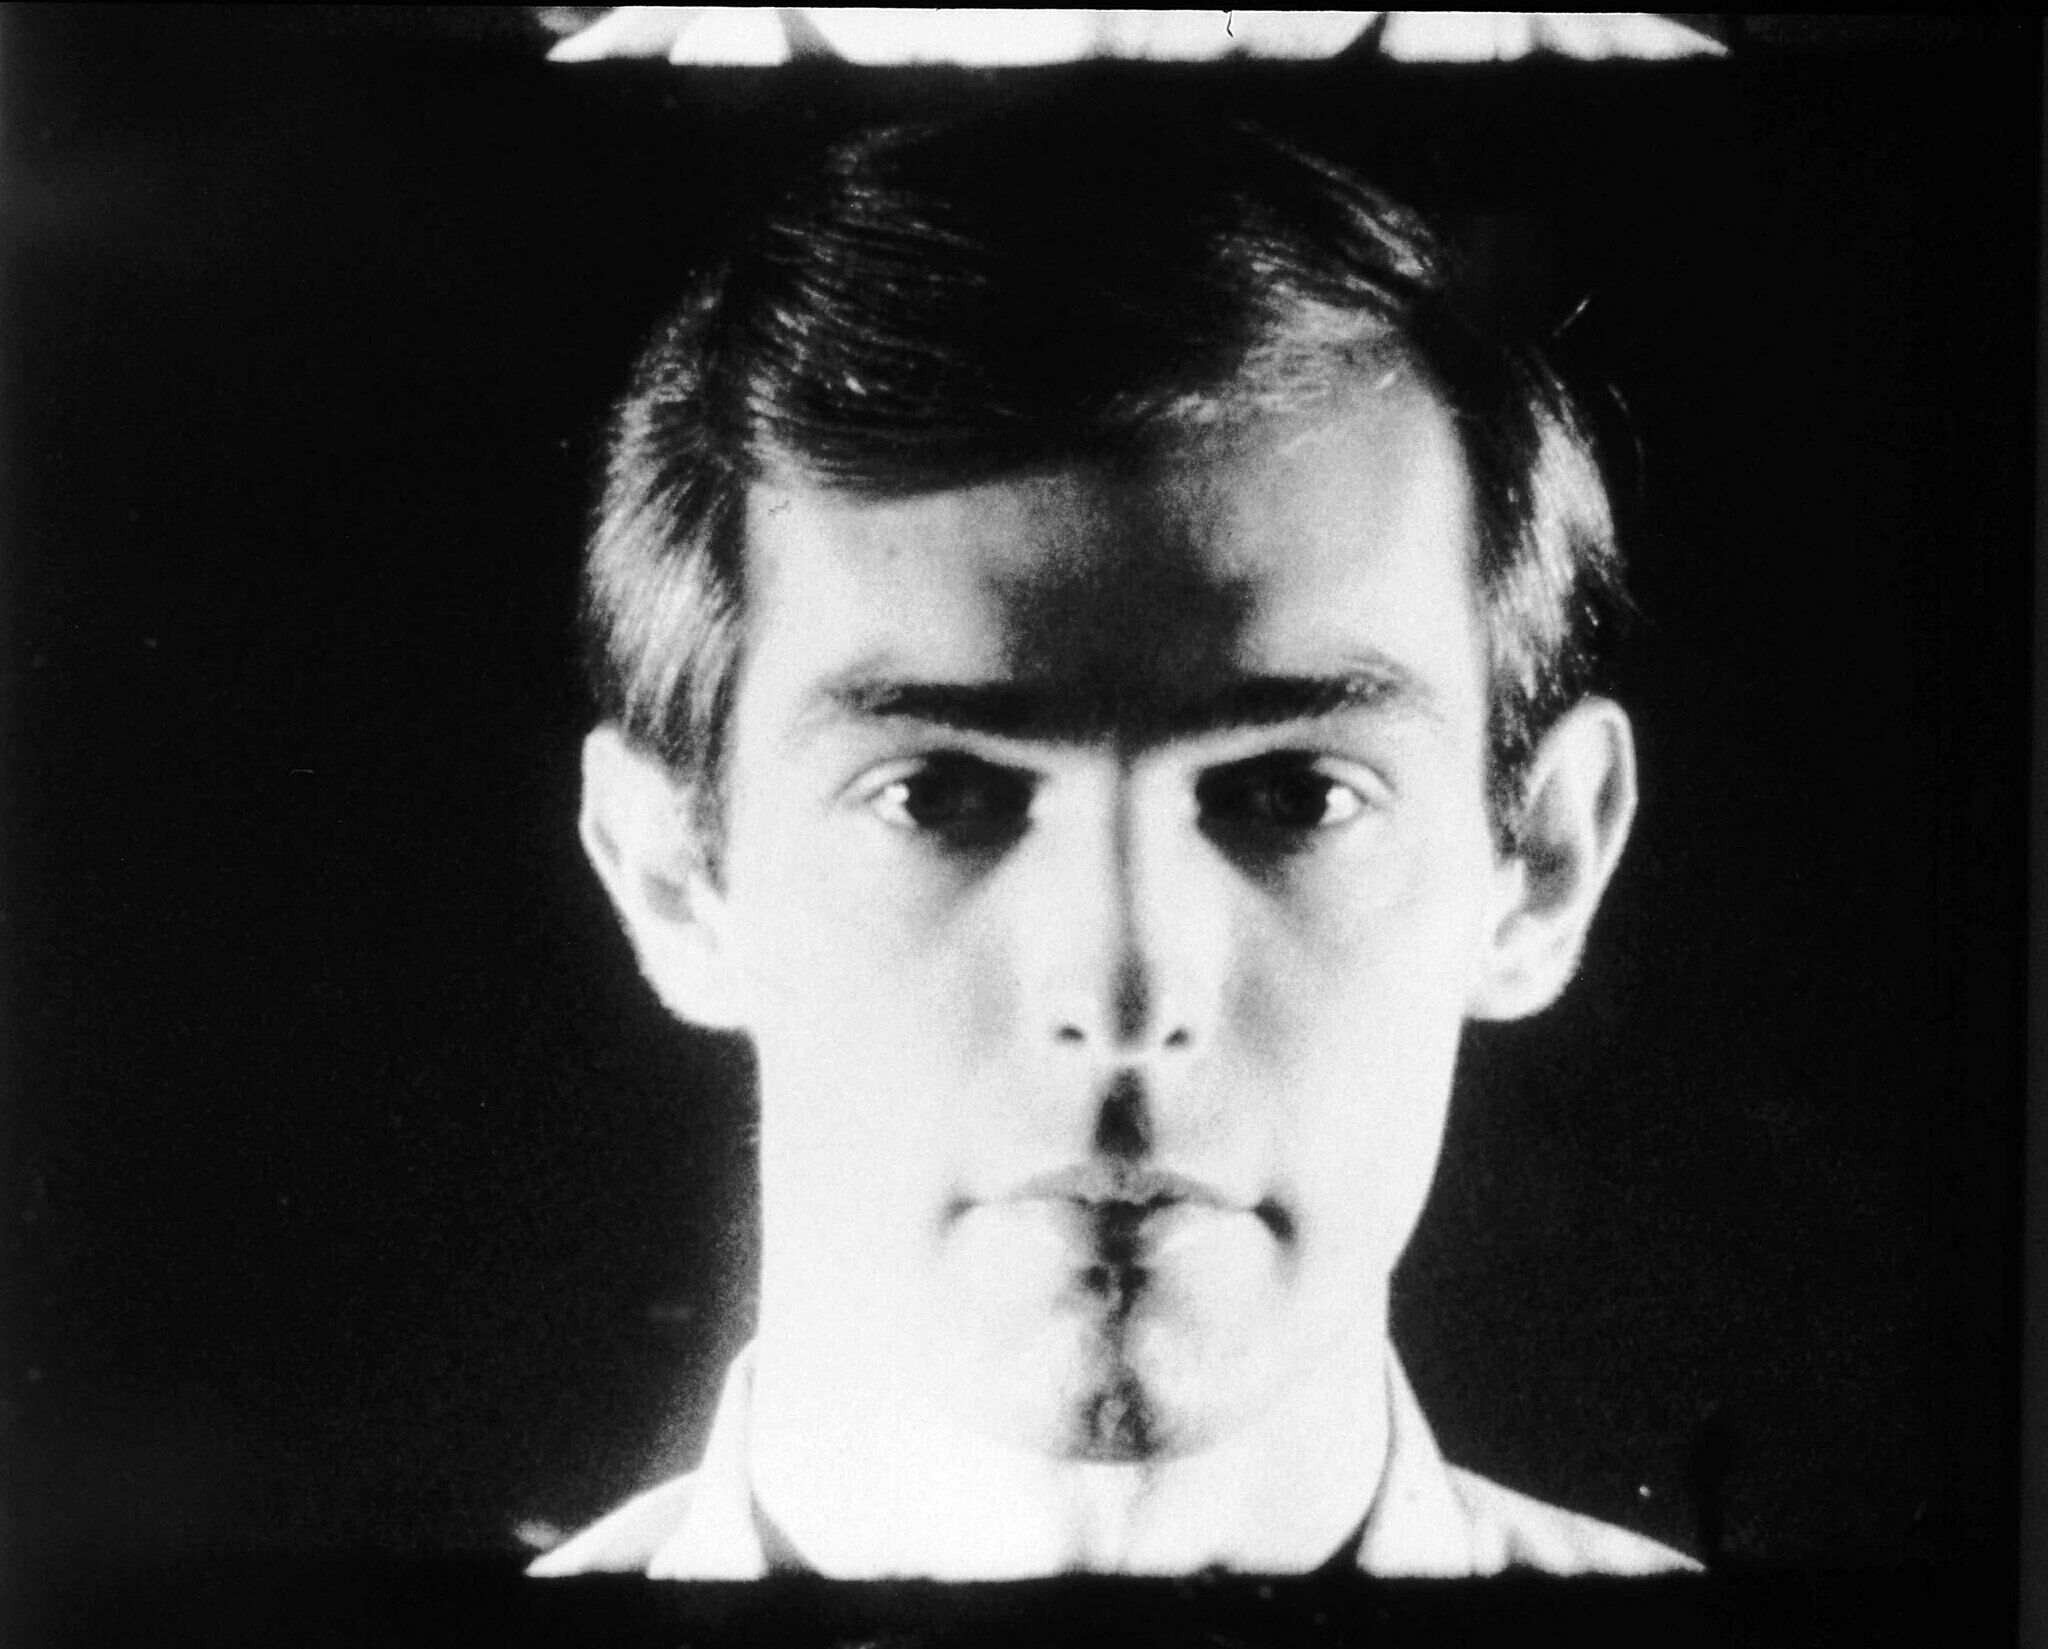 A still of a film work by Andy Warhol. Peter Hujar is depicted in black and white